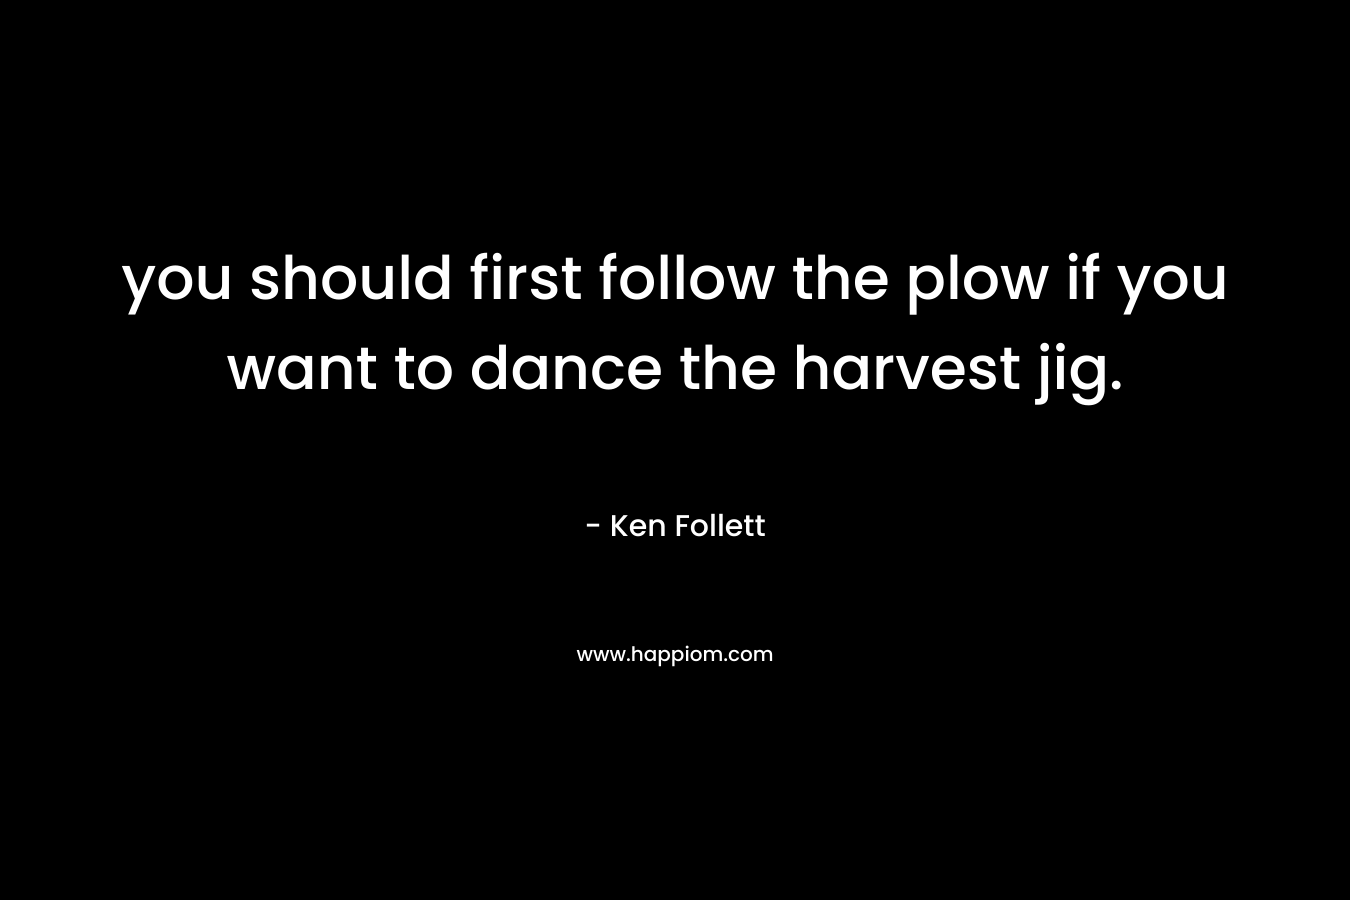 you should first follow the plow if you want to dance the harvest jig.